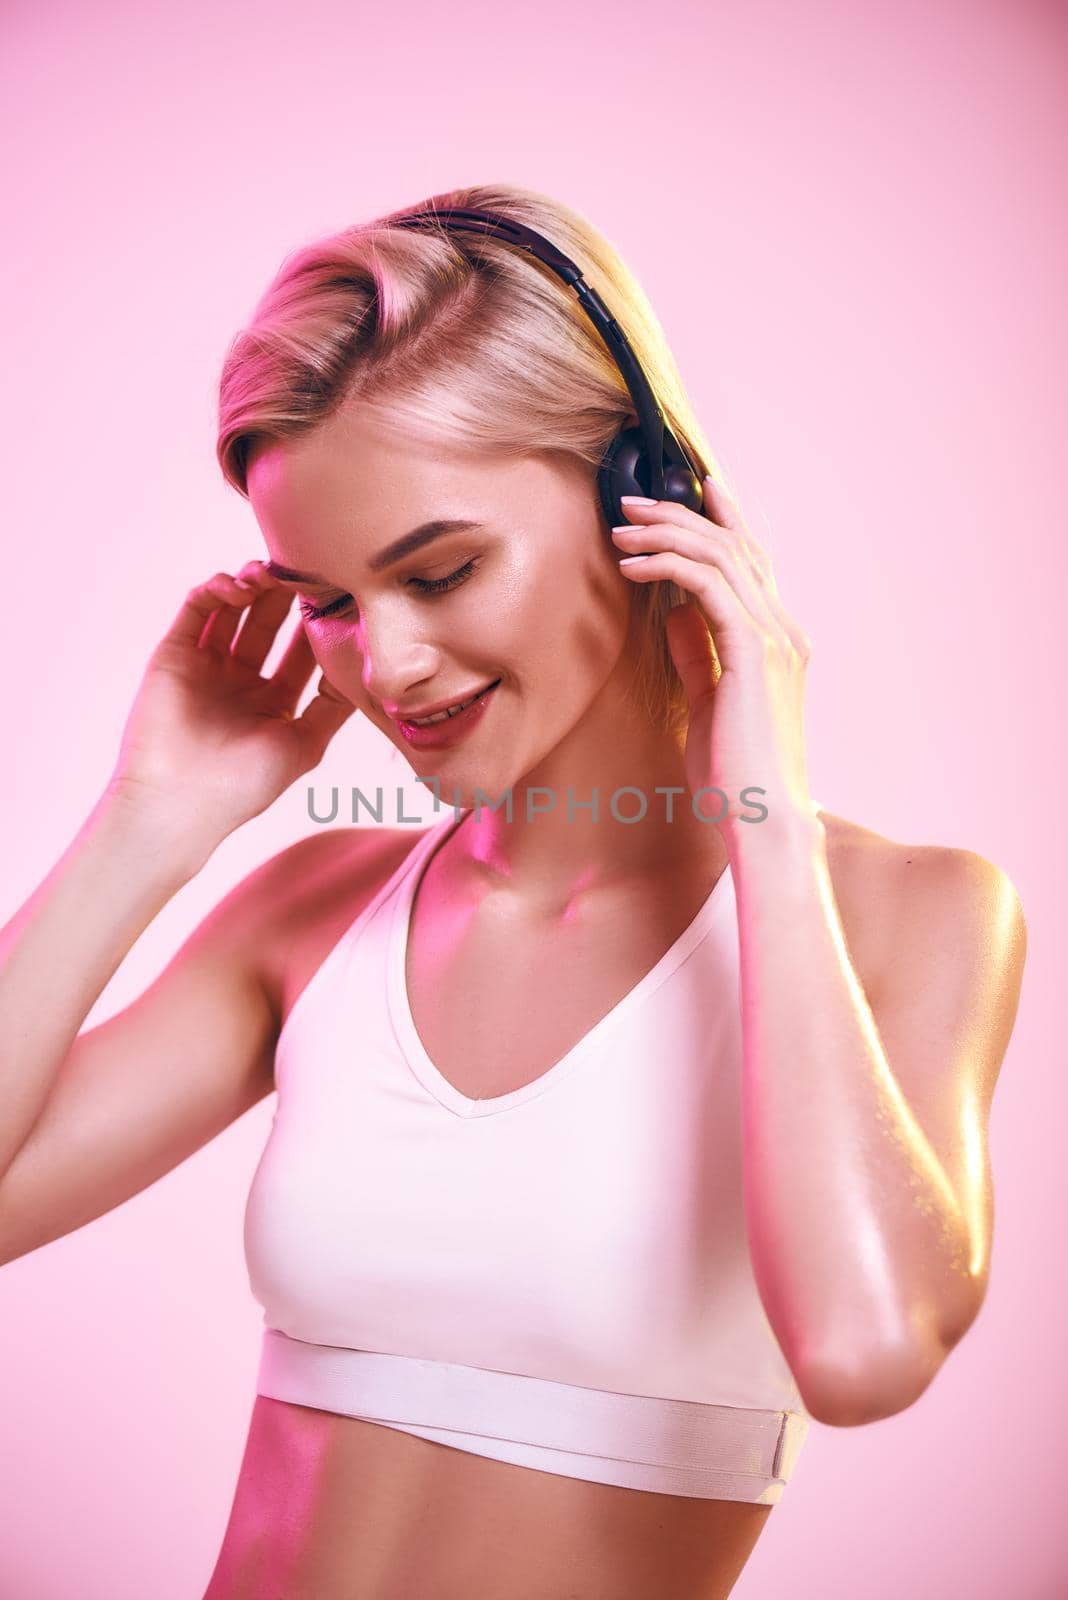 Enjoying music. Close up of cute and sporty woman in headphones listening music and smiling while standing against pink background. Sport. Music concept